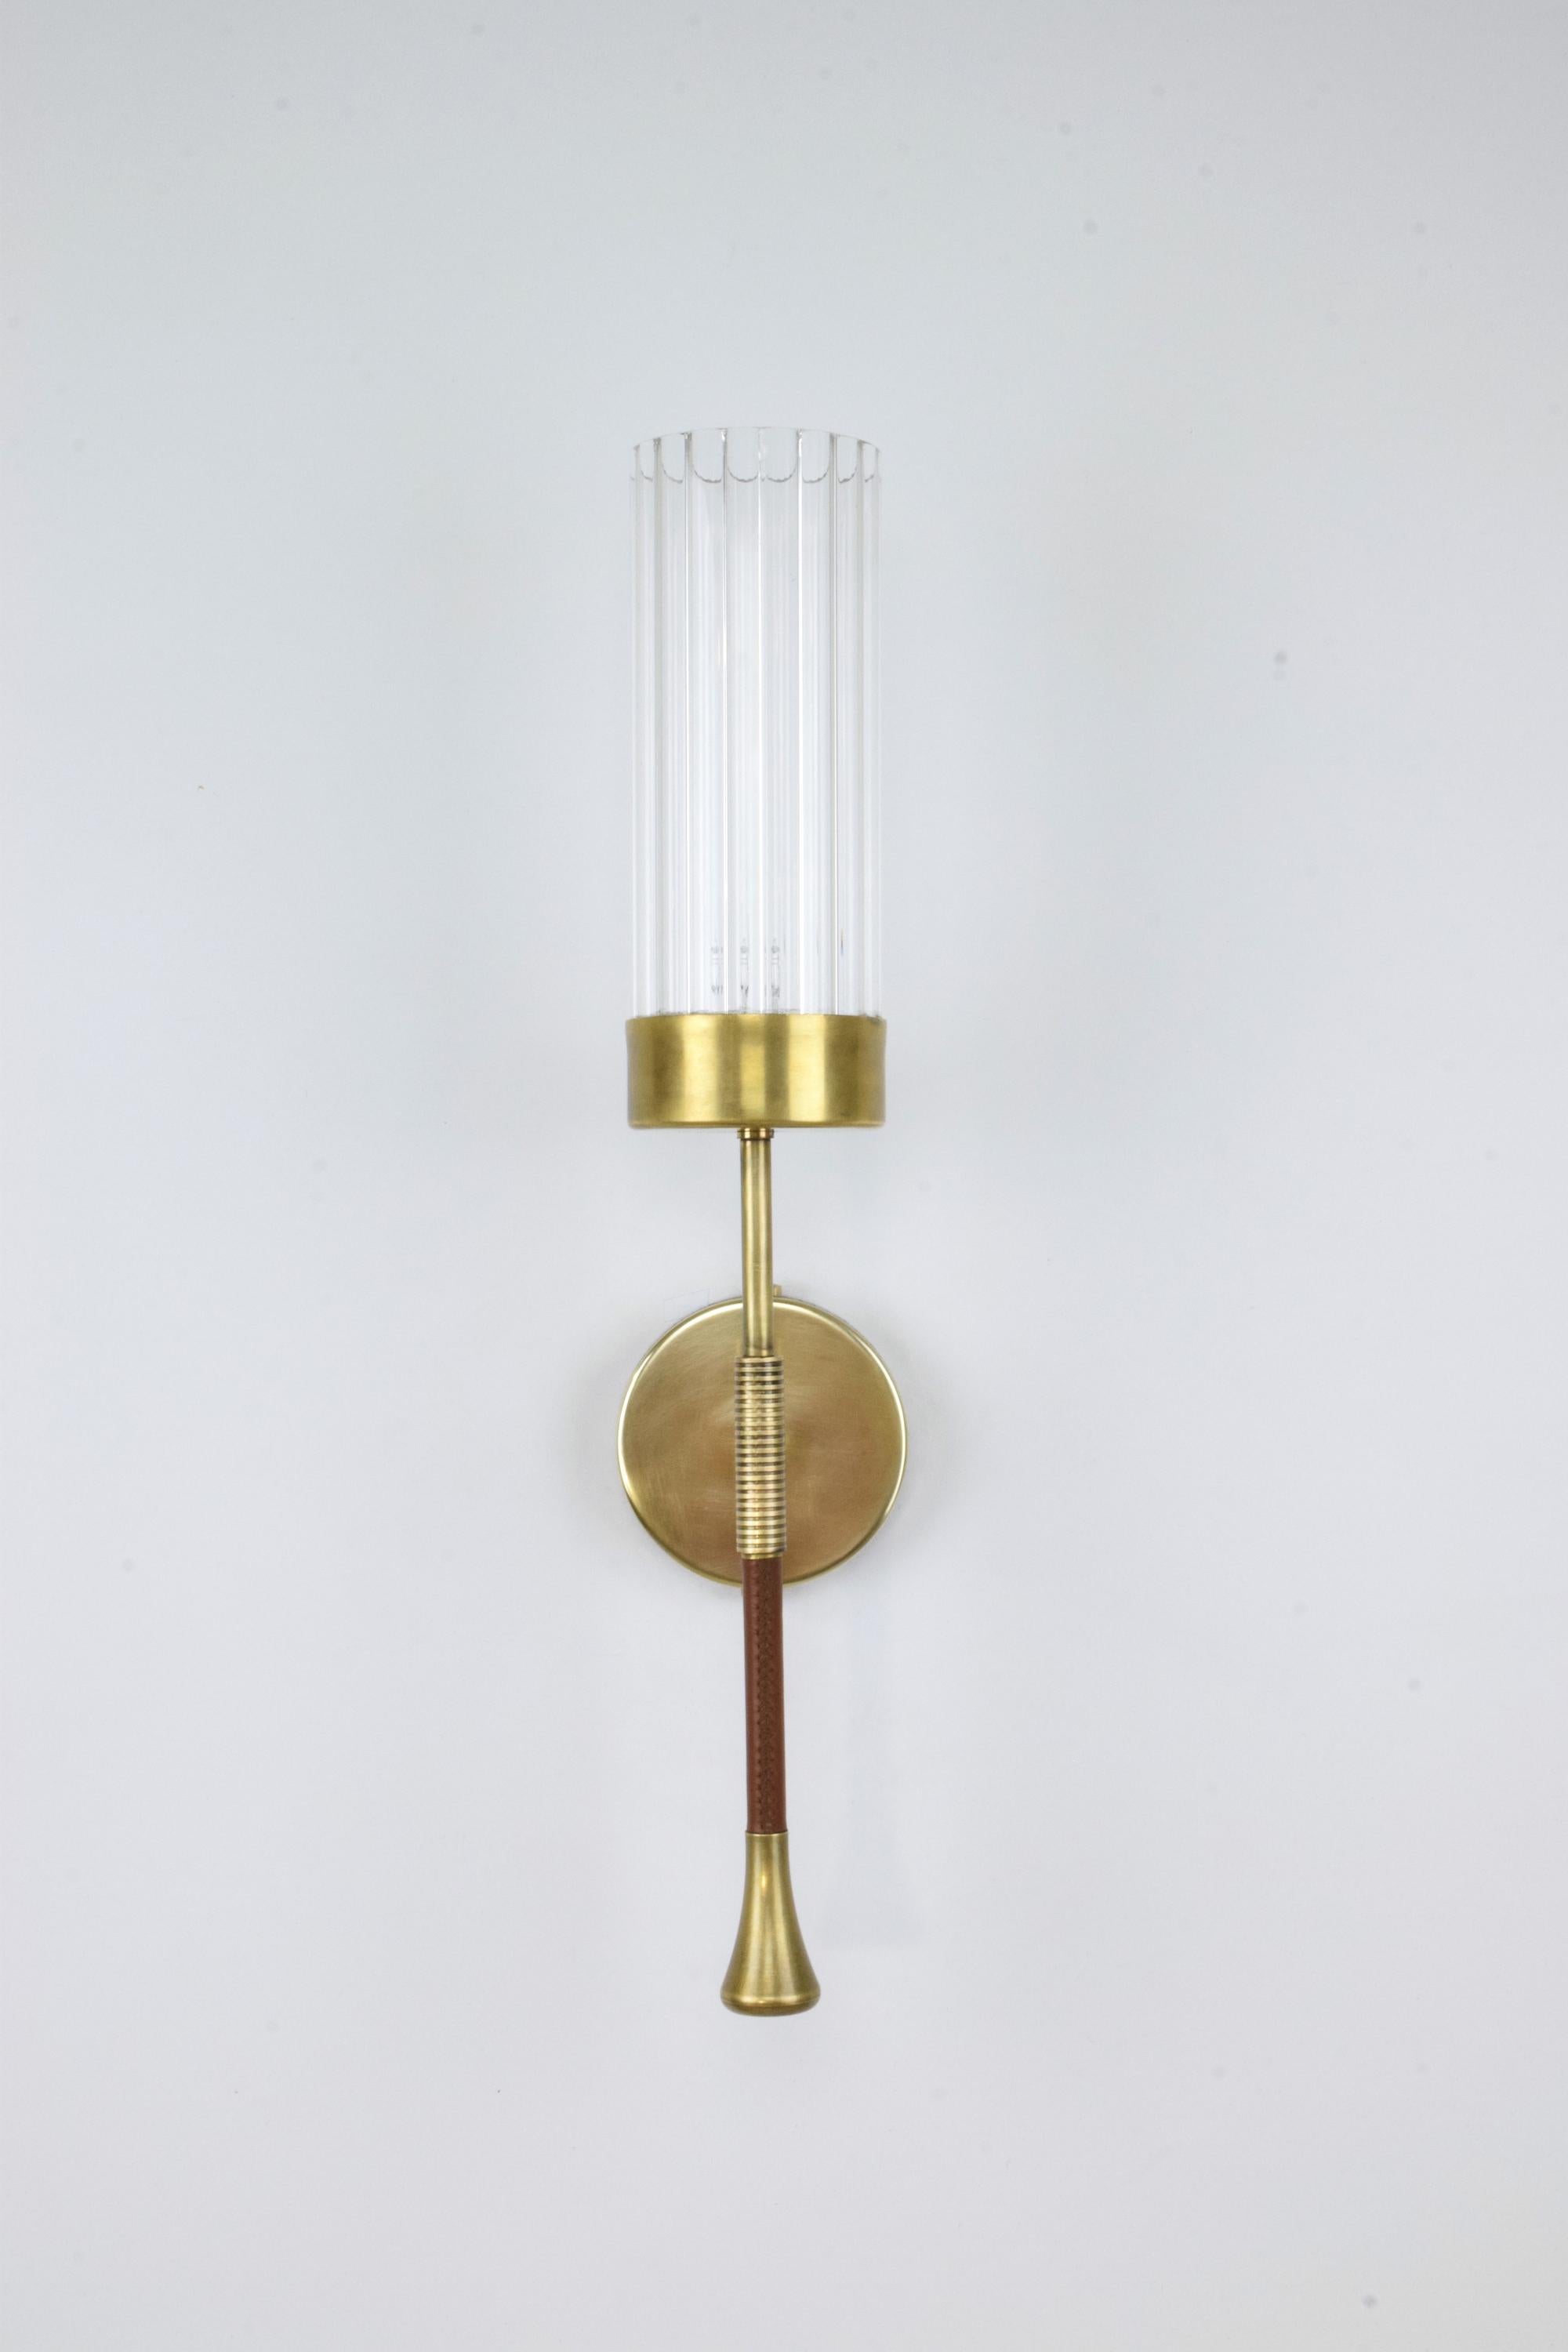 Portuguese DAYA-W1M Brass Modern Engraved Wall Light, Flow 2 Collection For Sale